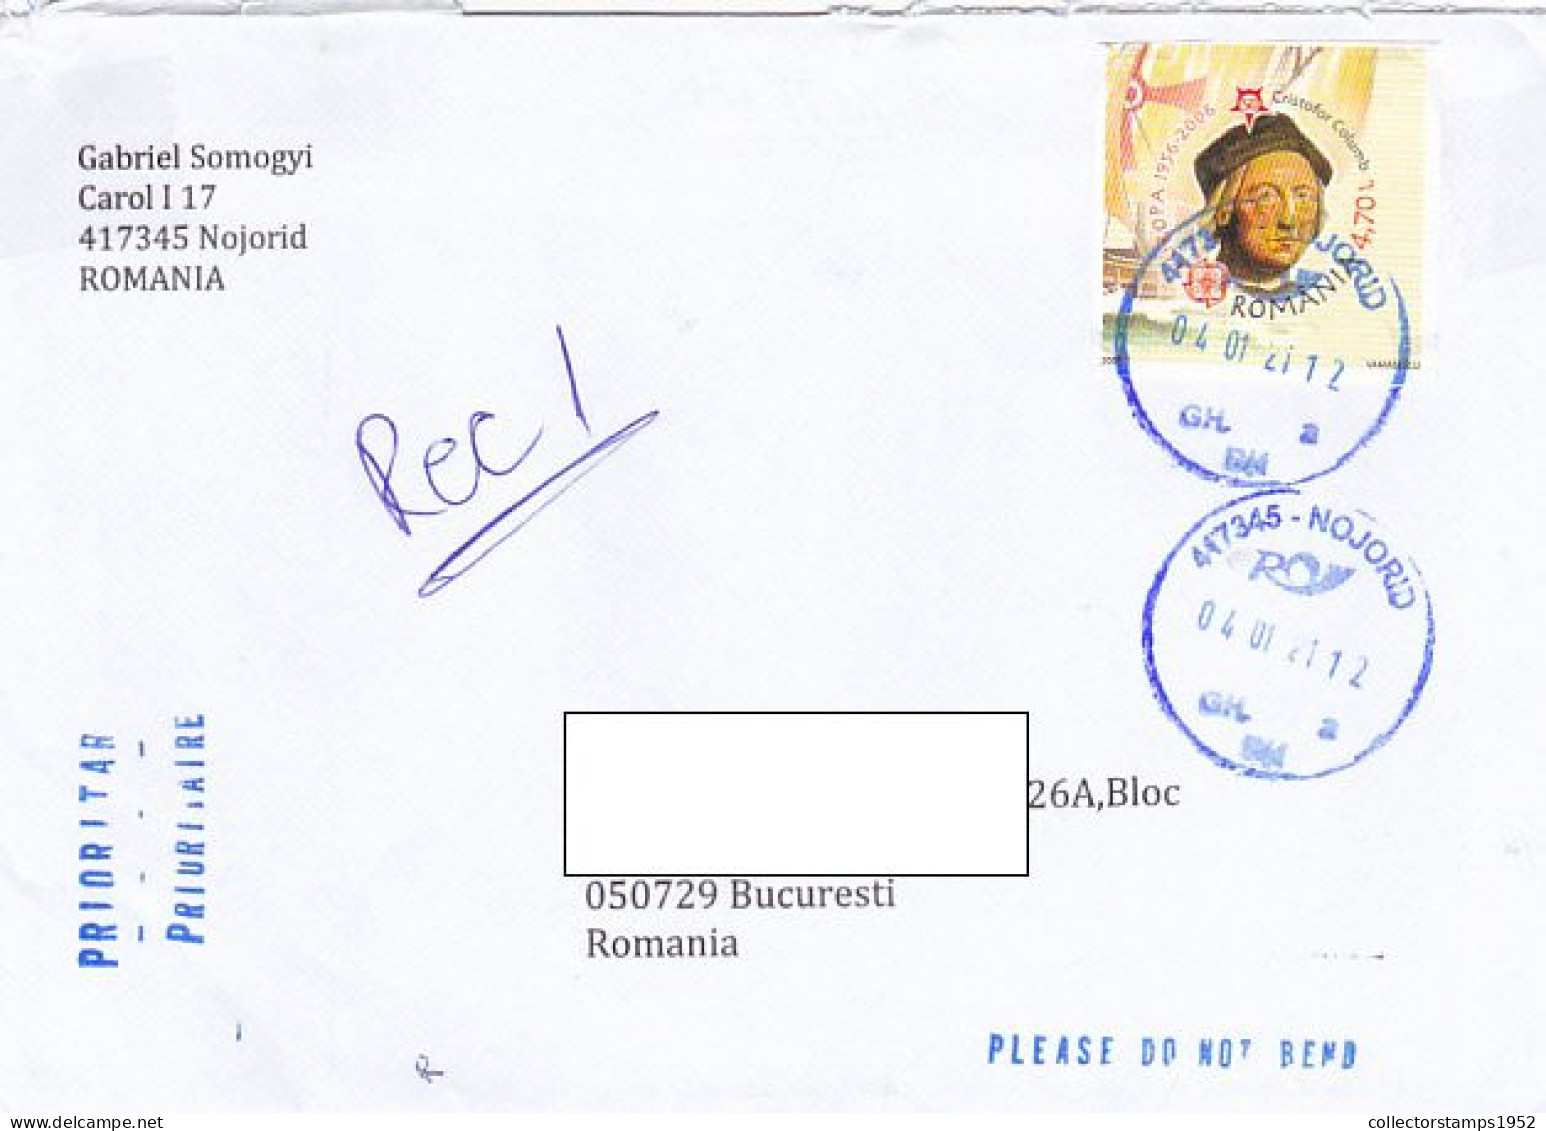 CHRISTOPHER COLUMBUS, DISCOVERY OF AMERICA, FINE STAMPS ON COVER, 2021, ROMANIA - Covers & Documents